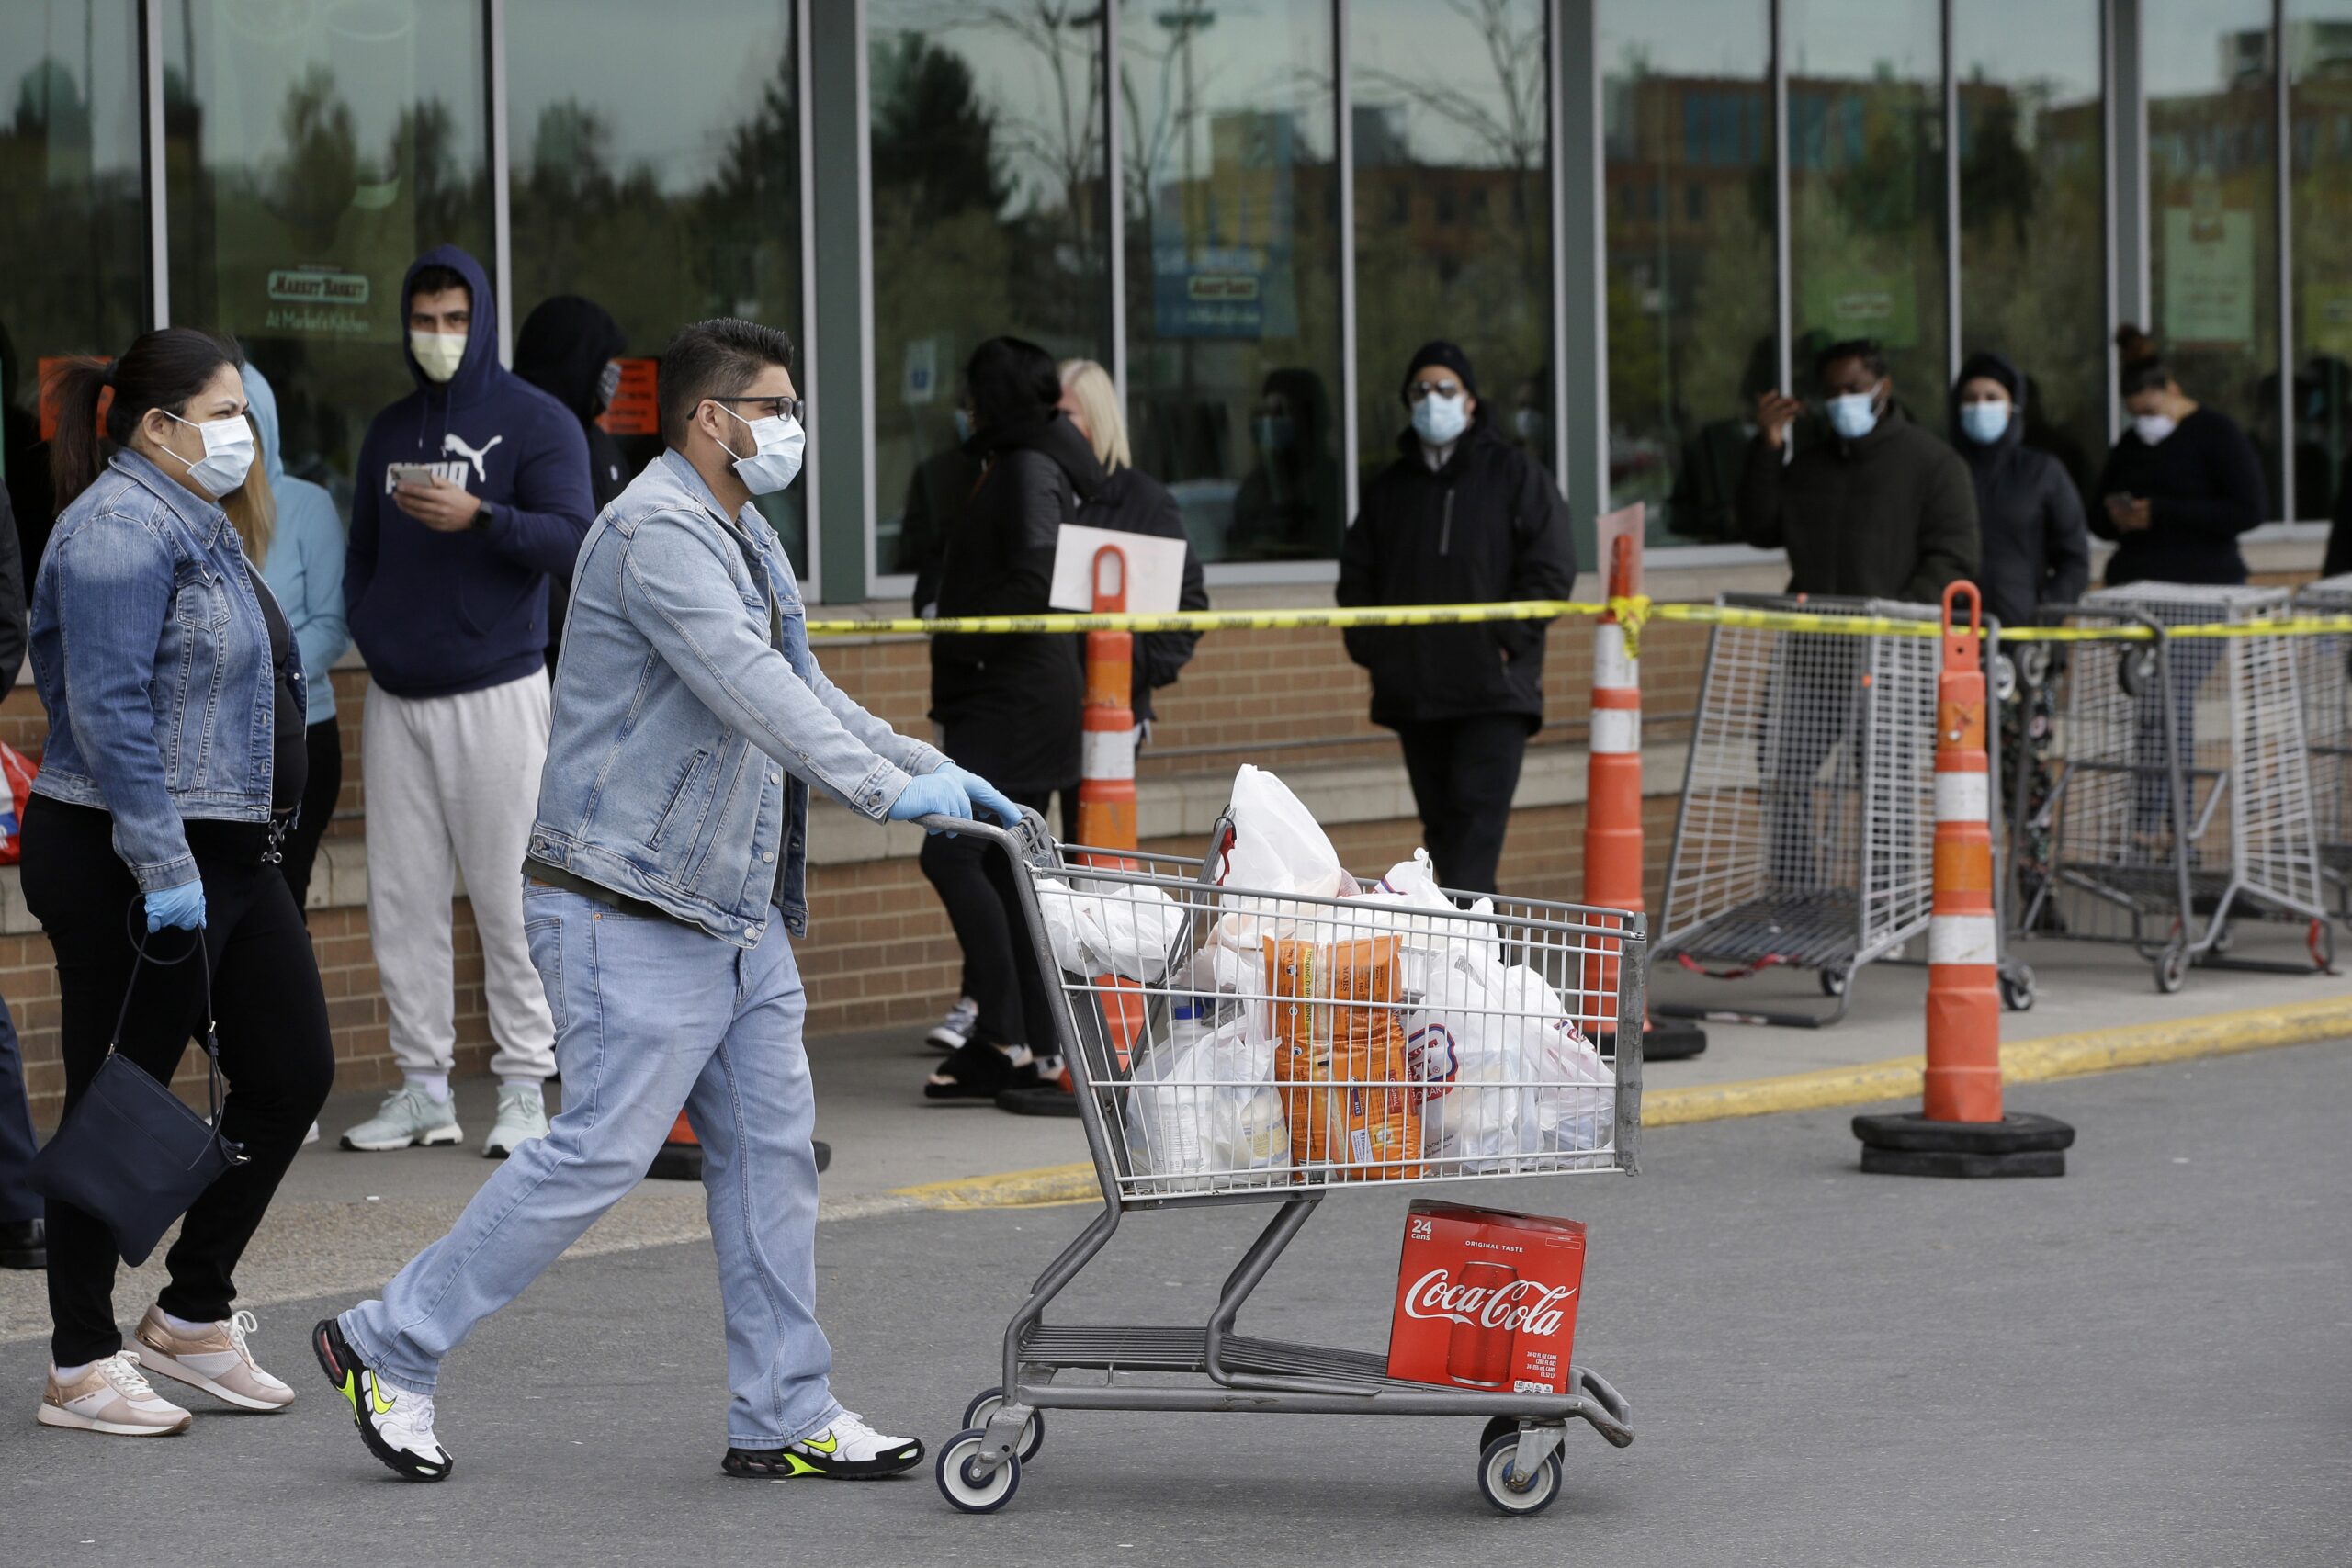 A man pushes a grocery cart while wearing a mask